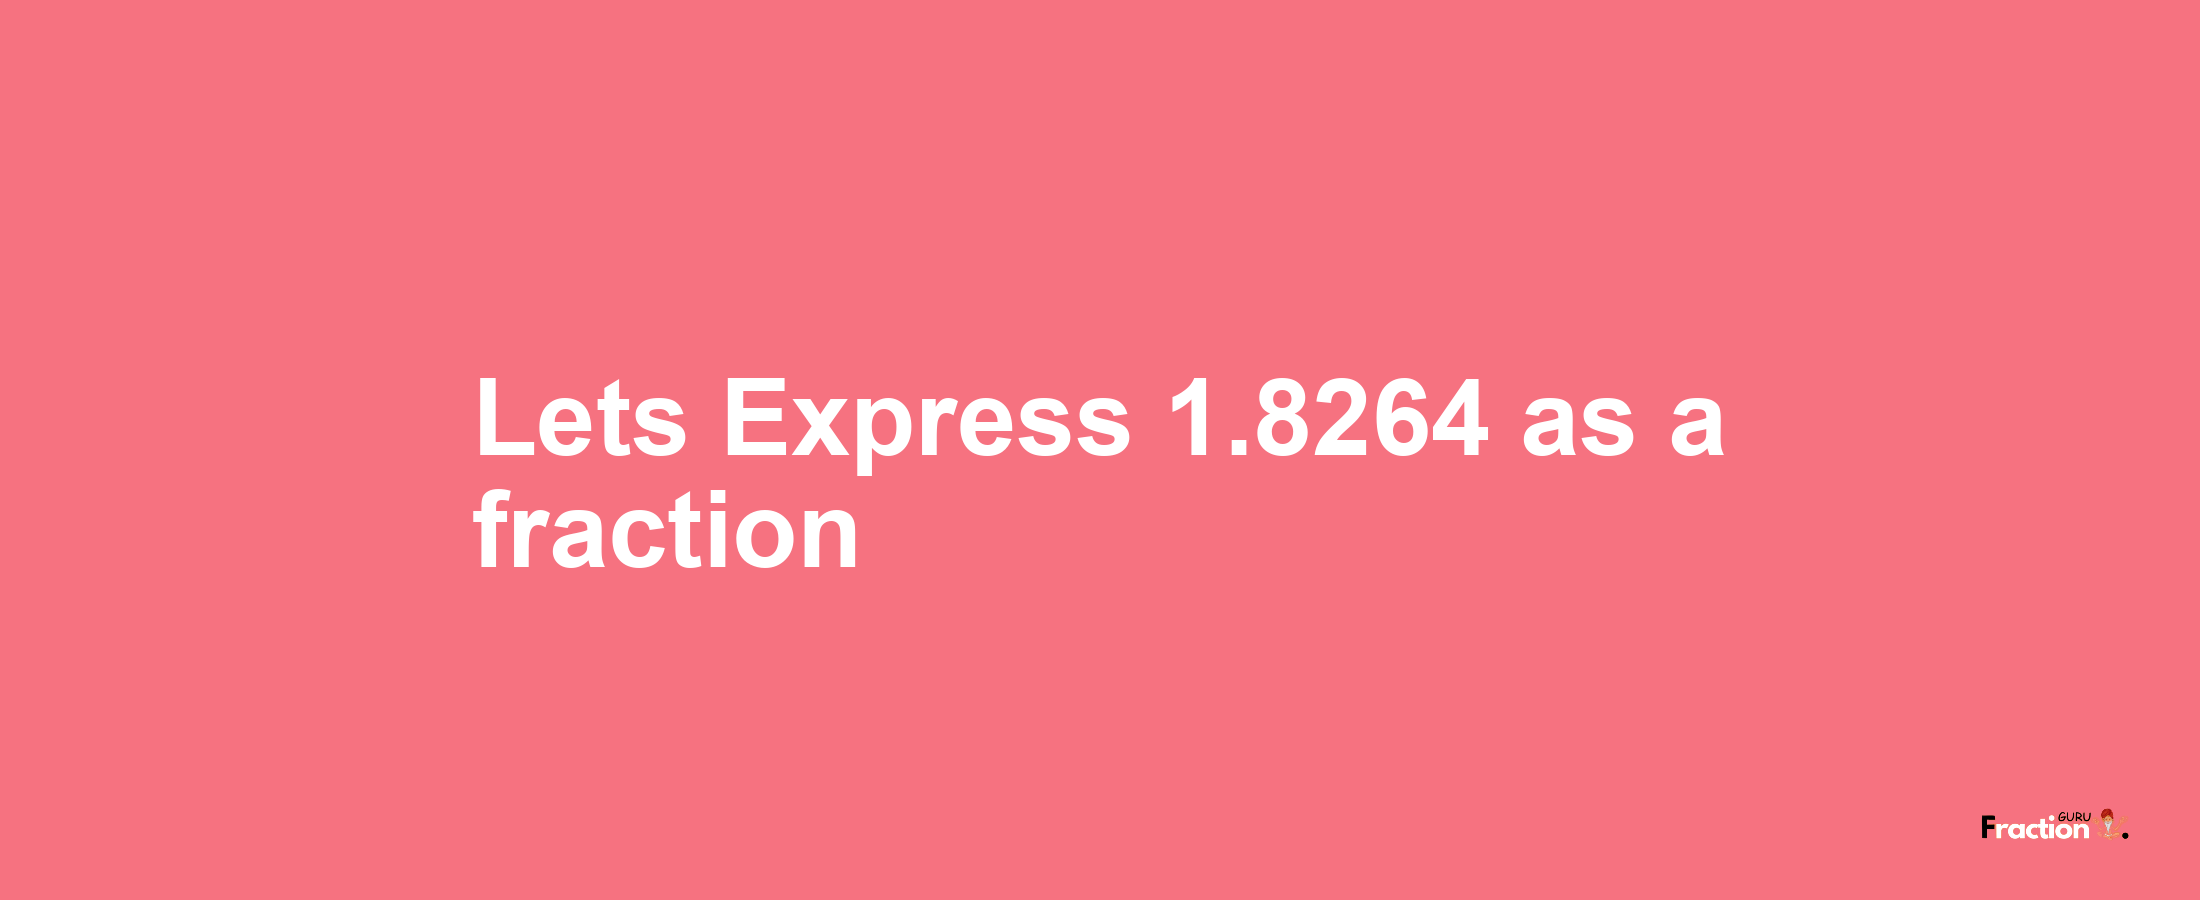 Lets Express 1.8264 as afraction